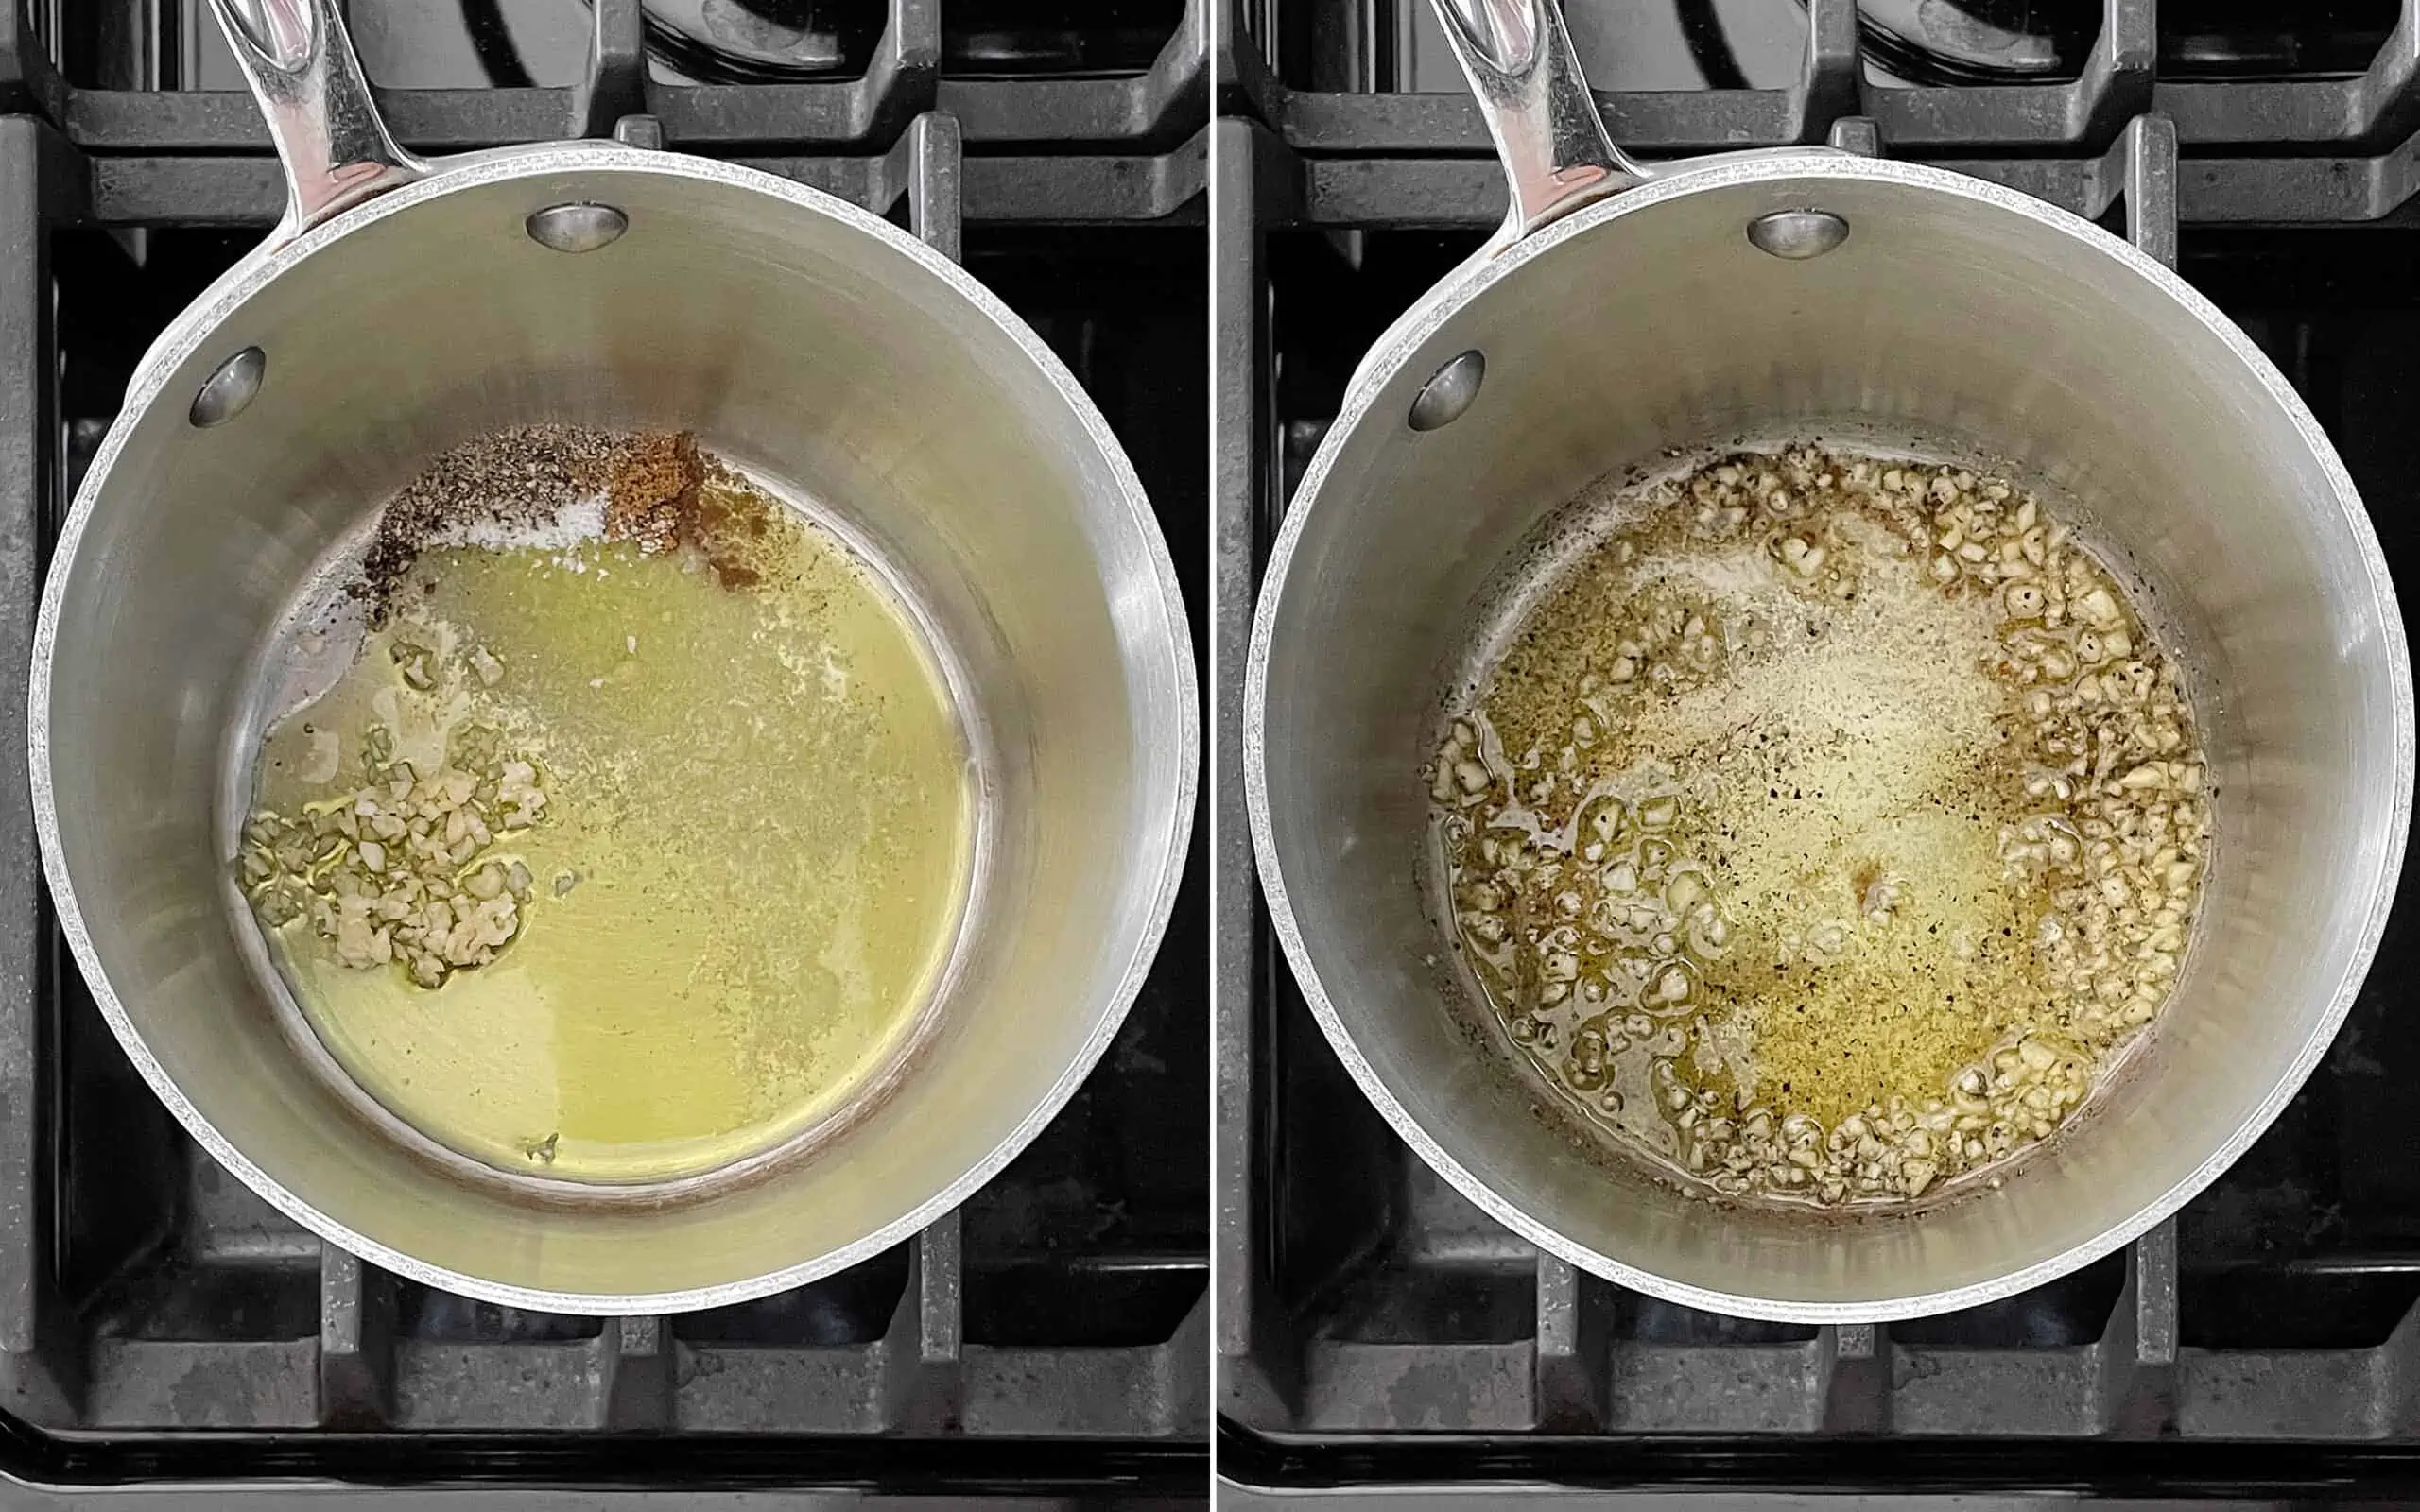 Heat the olive oil in a small pot on the stove. Saute the garlic and spices in the oil.